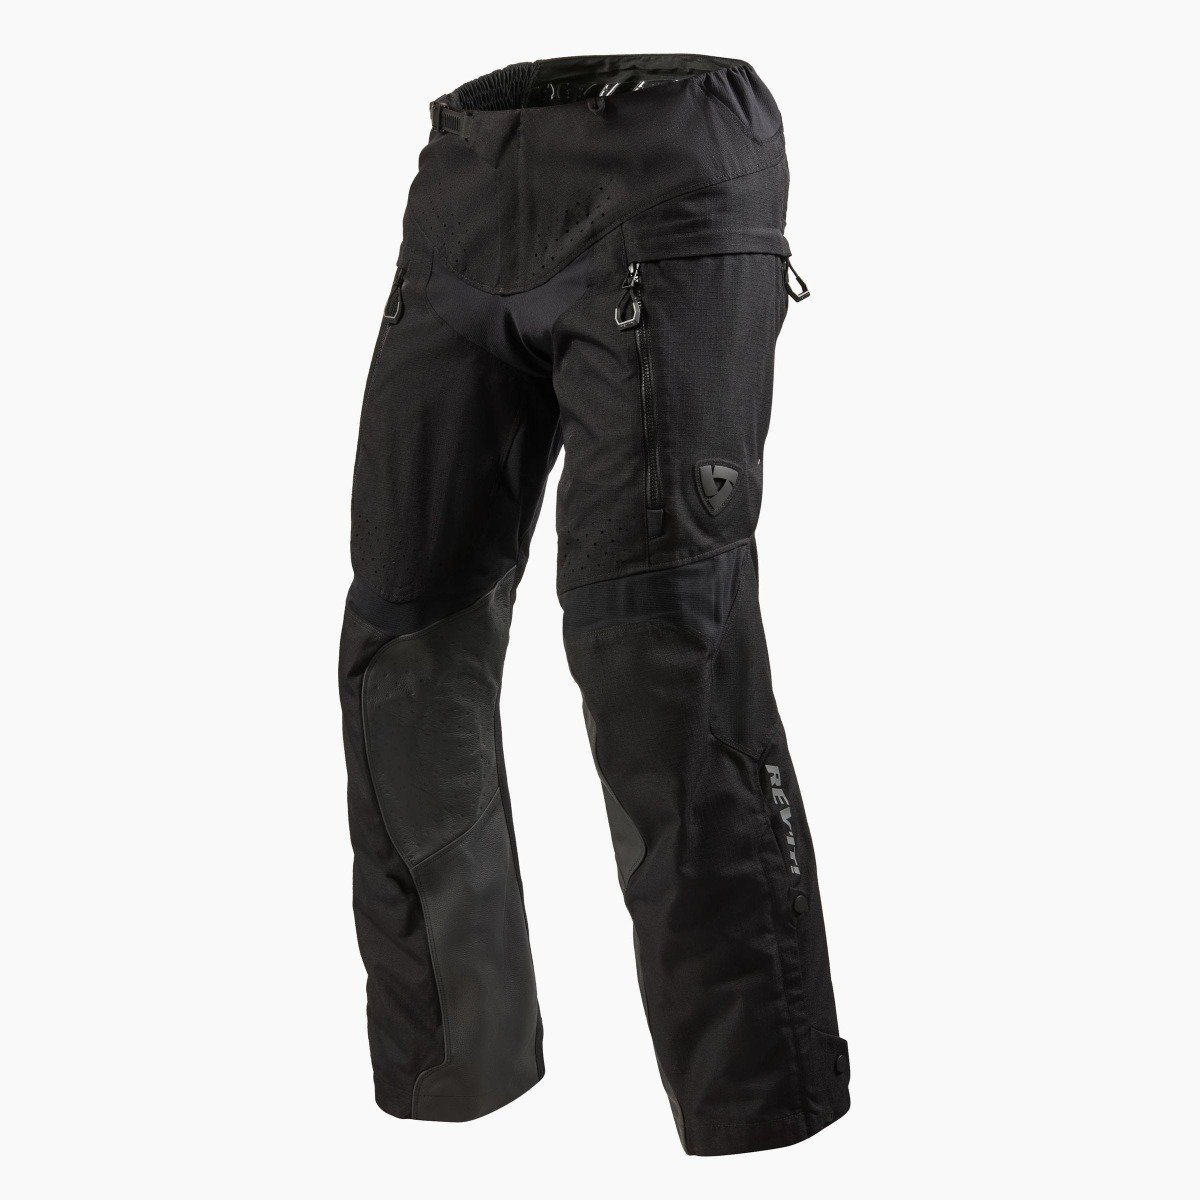 Image of REV'IT! Continent Black Motorcycle Pants Size XYL EN